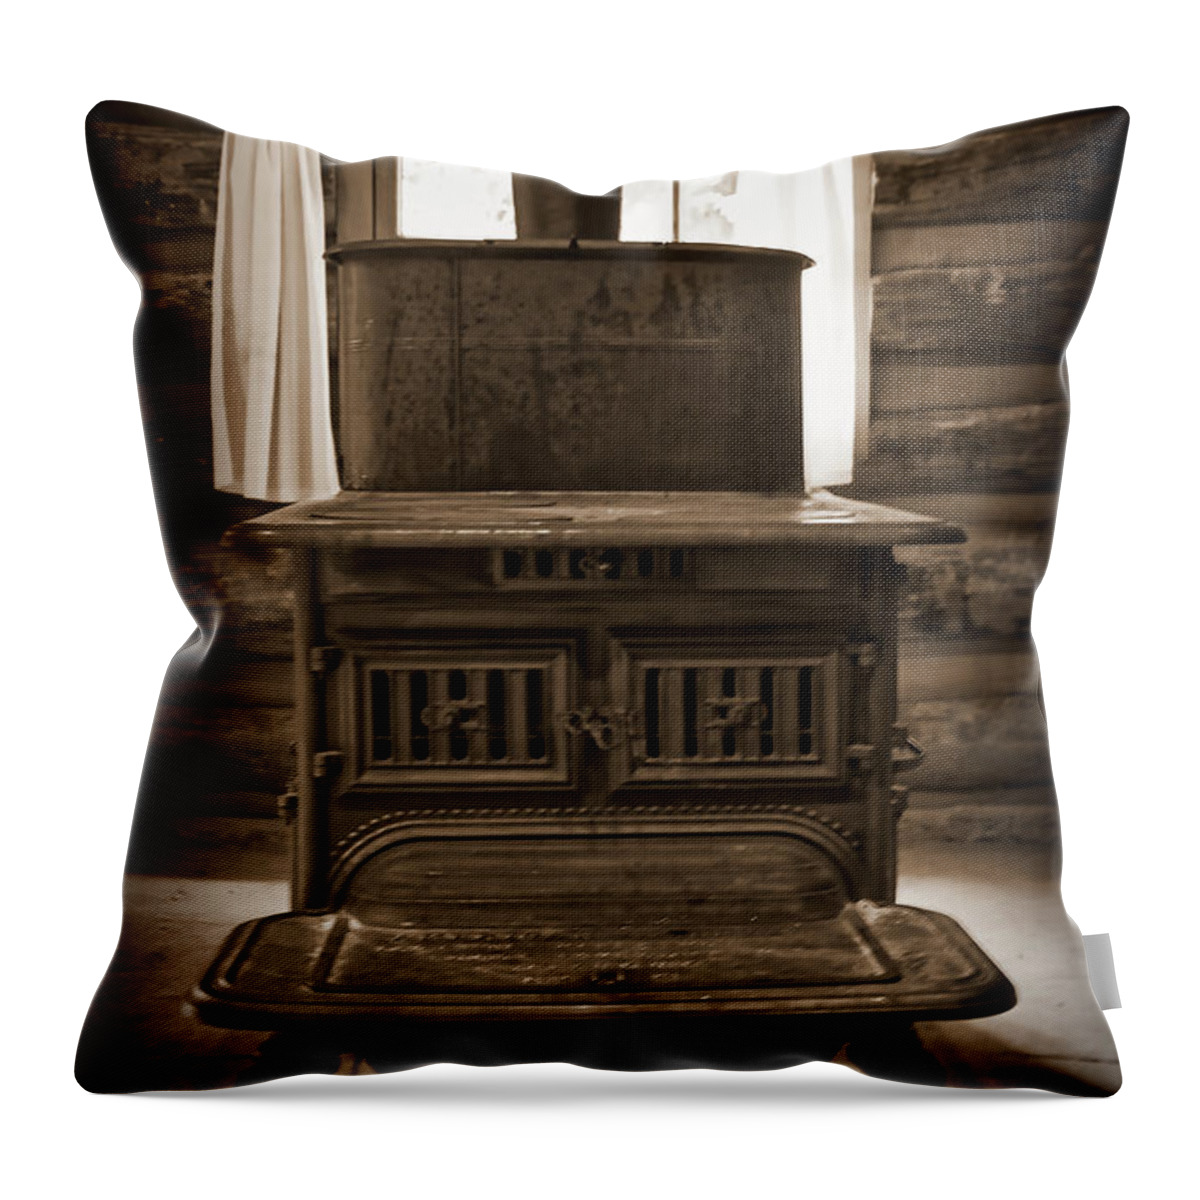 Sharlot-hall Throw Pillow featuring the photograph The Stove In The Cabin by Kirt Tisdale